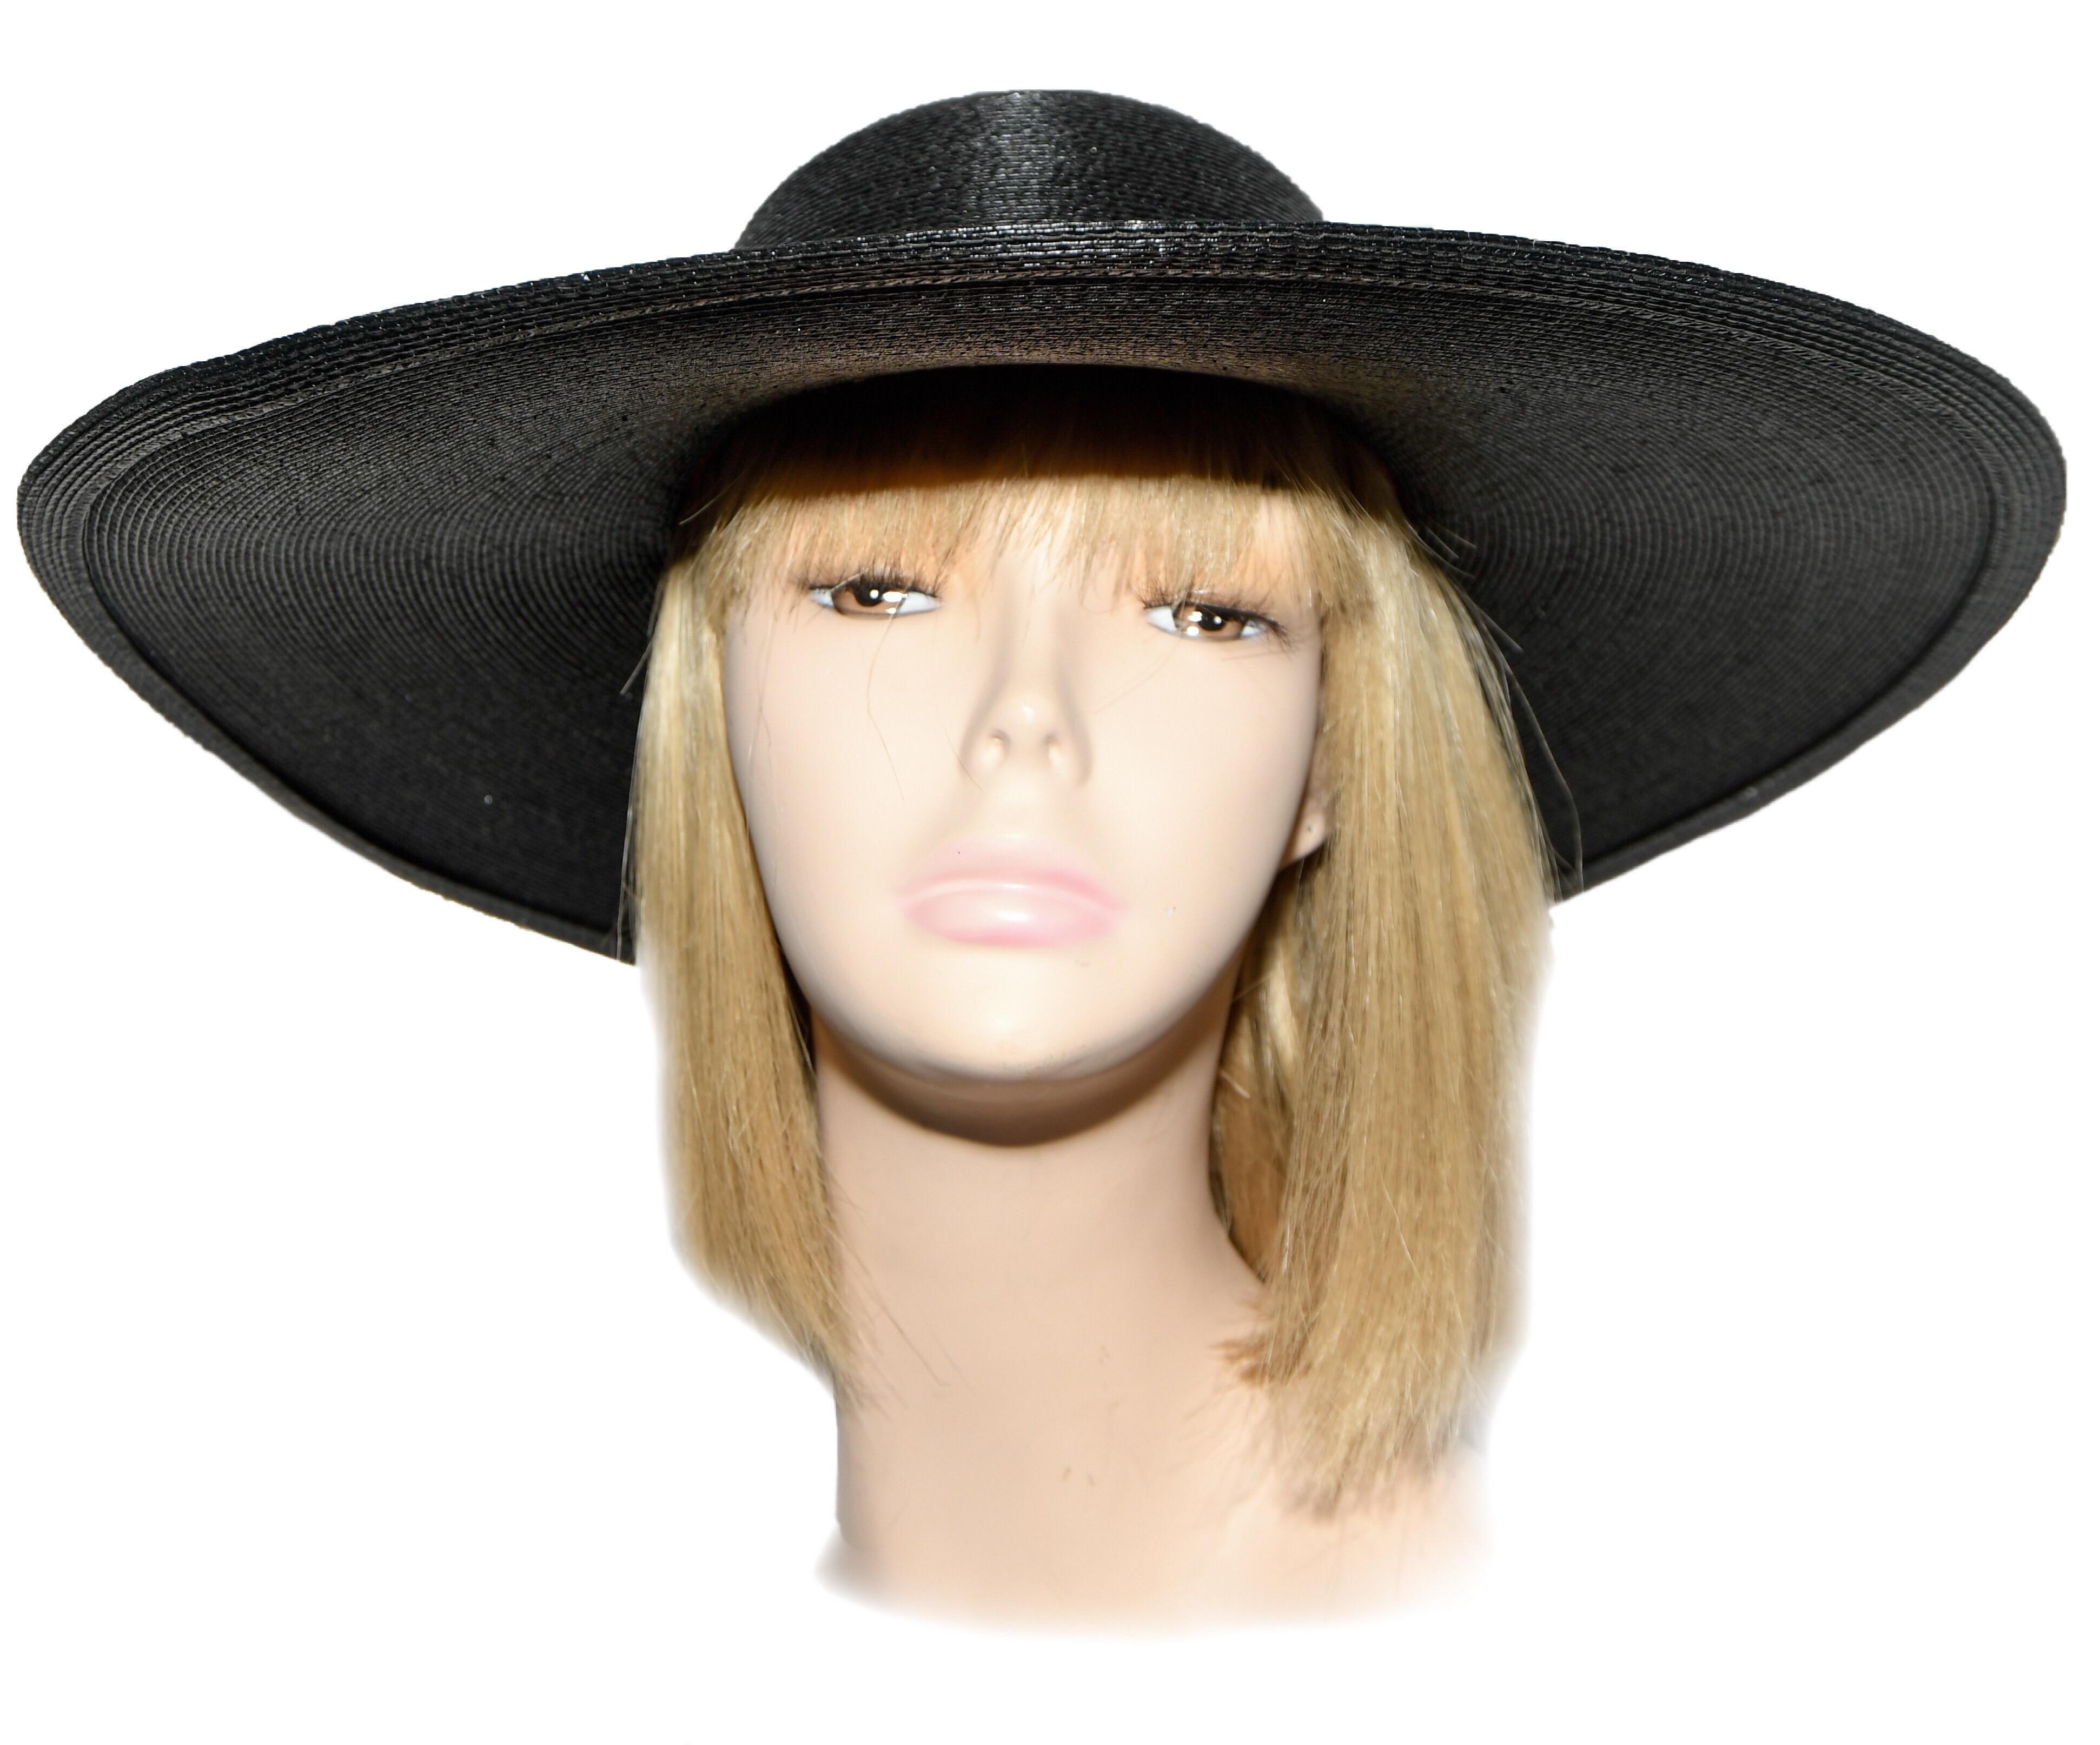 This wide brim black straw fedora hat created with glossy straw includes a black side bow hugging the head.  A label inside reading 